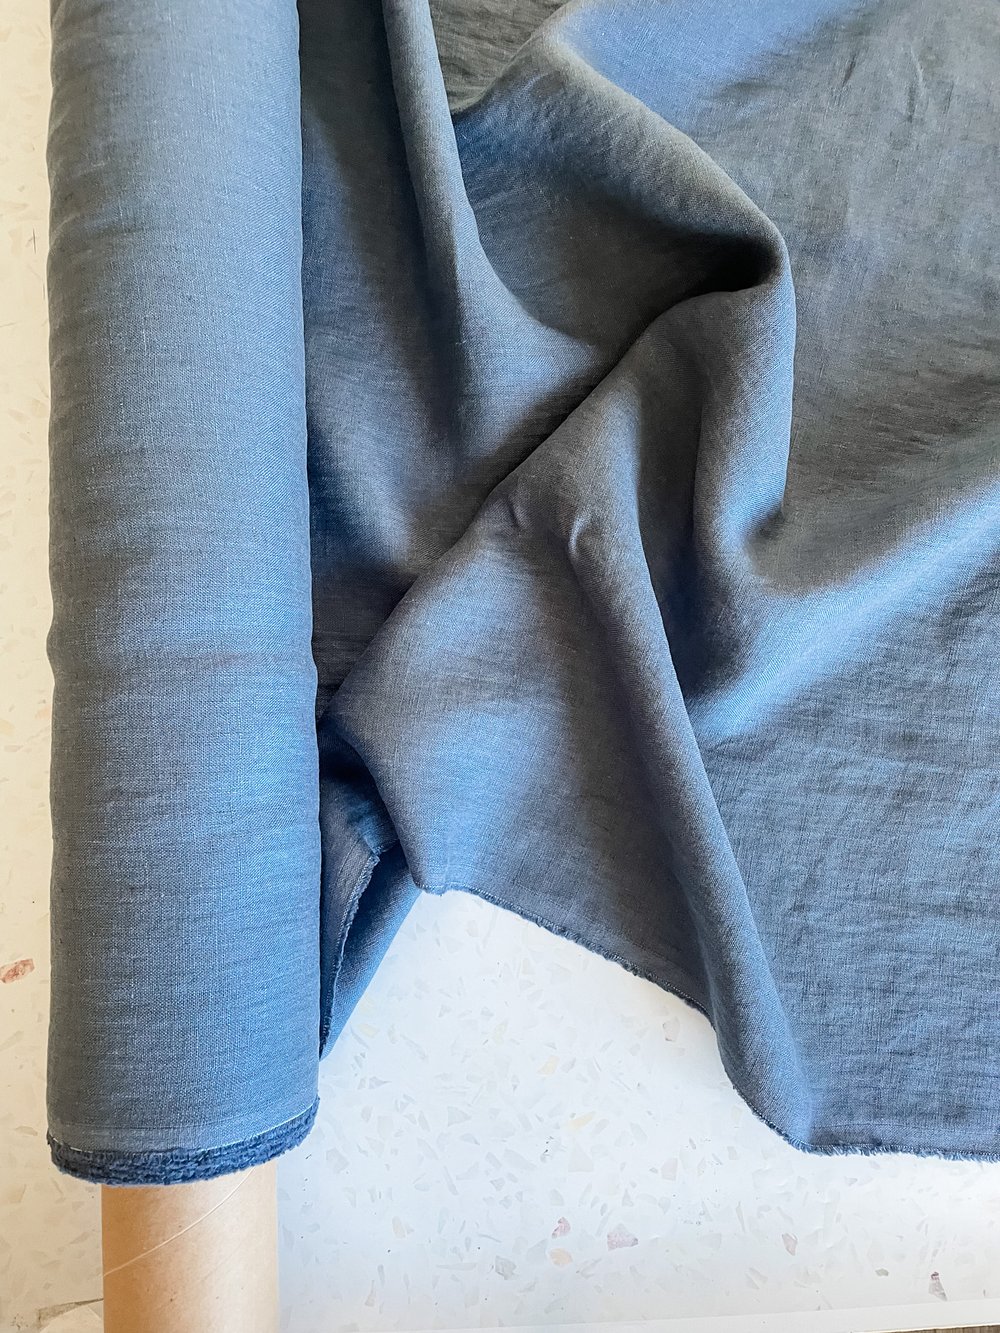 Fabric, Notions, Threads & More — Material Goods